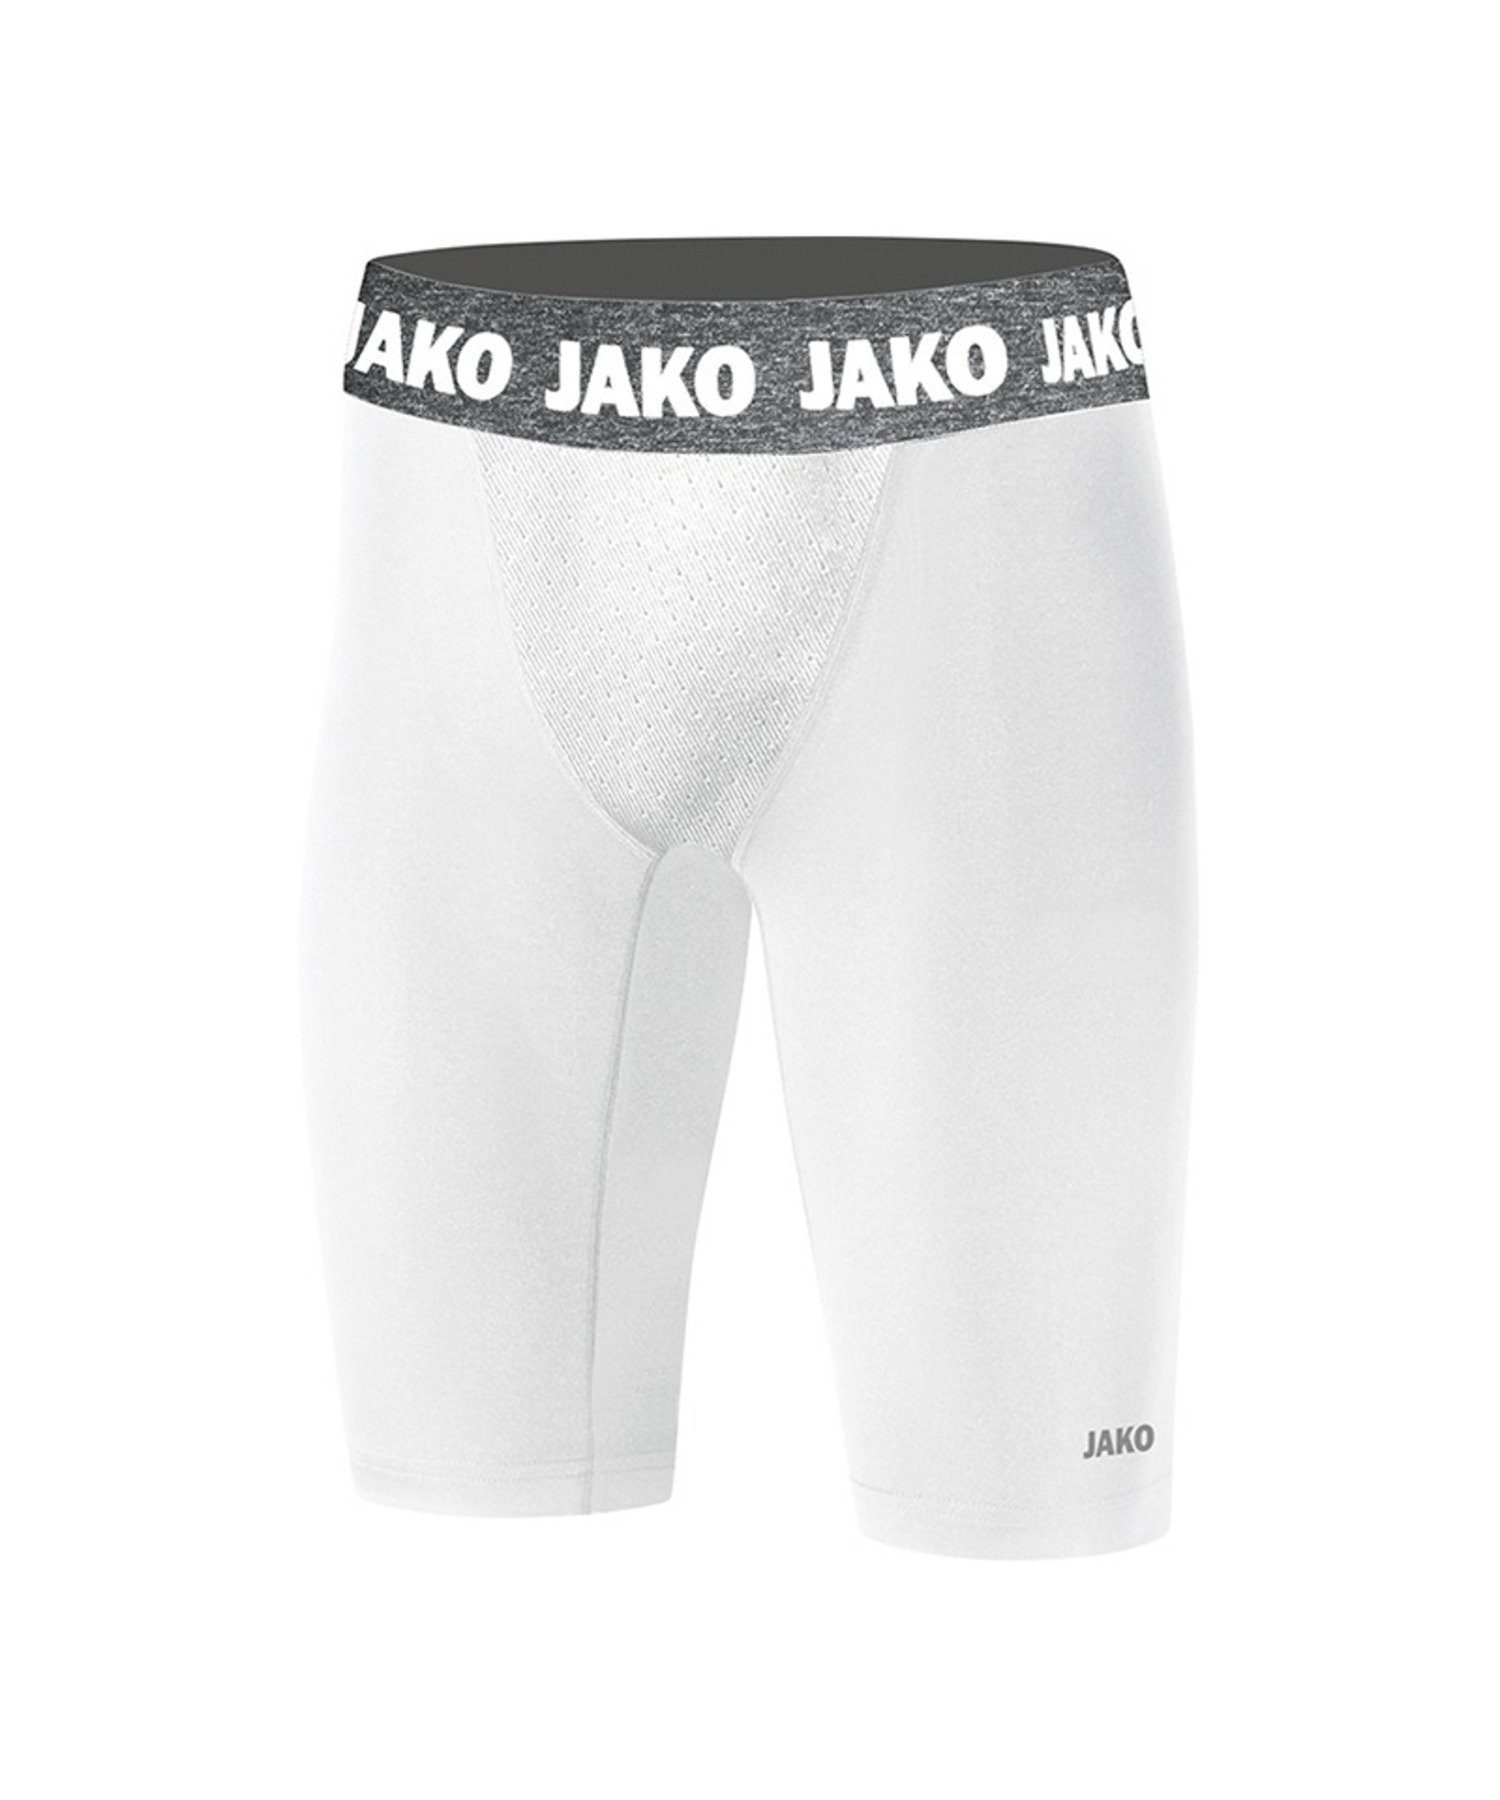 Jako Funktionshose Compression 2.0 Tight Short weiss